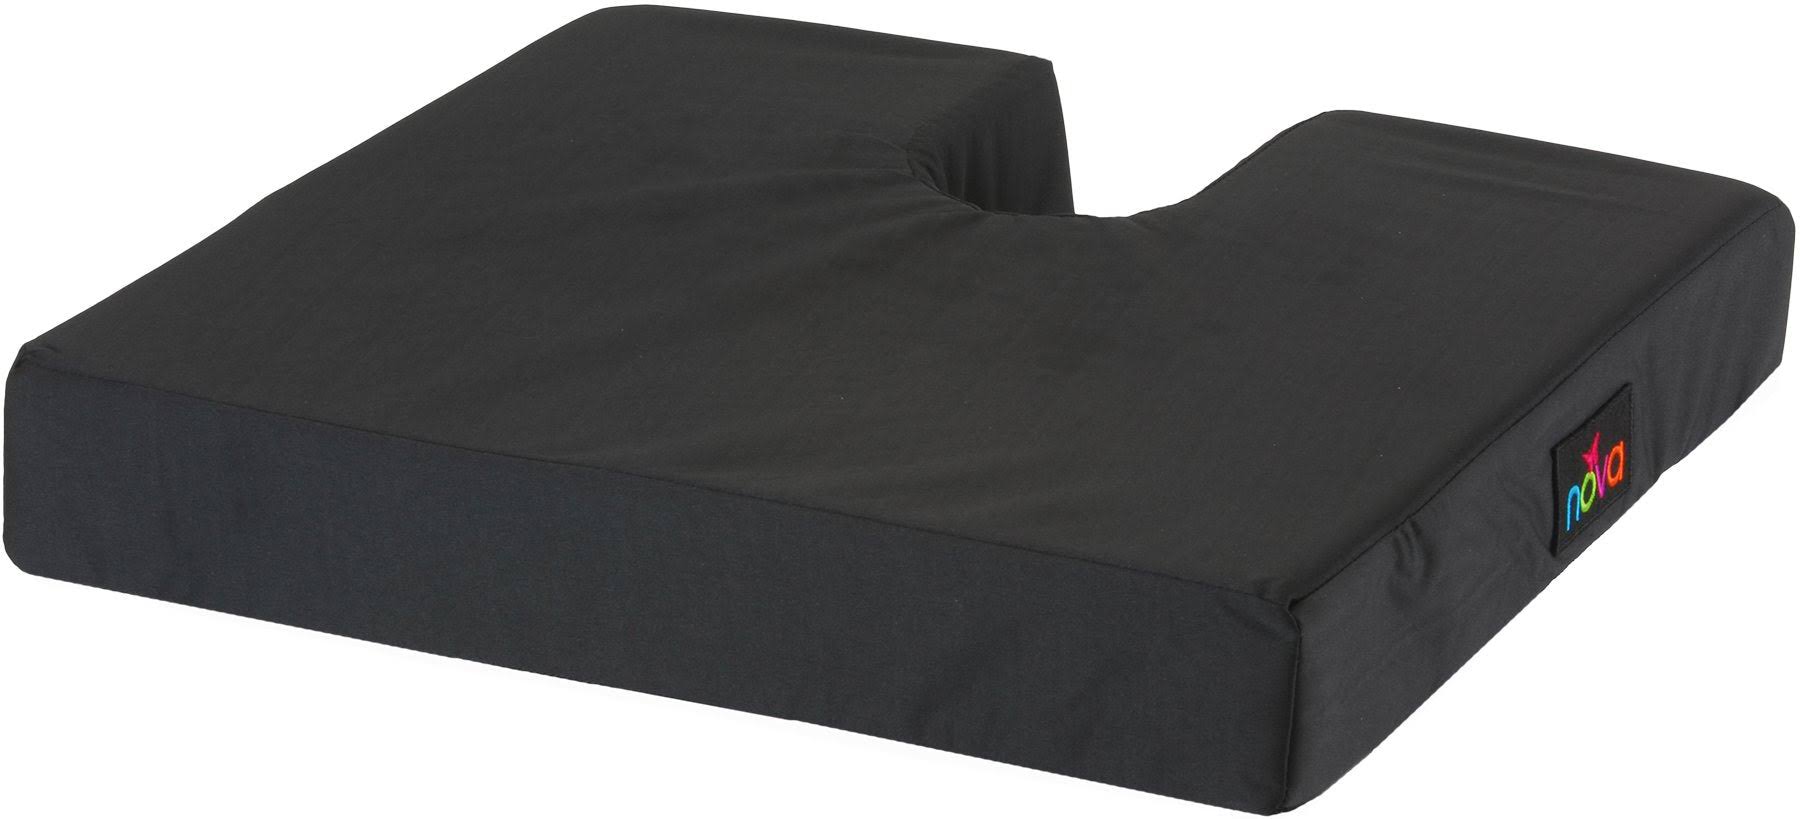 Nova Medical Products Coccyx Seat Cushion With Cover - Black, 46cm x 41cm